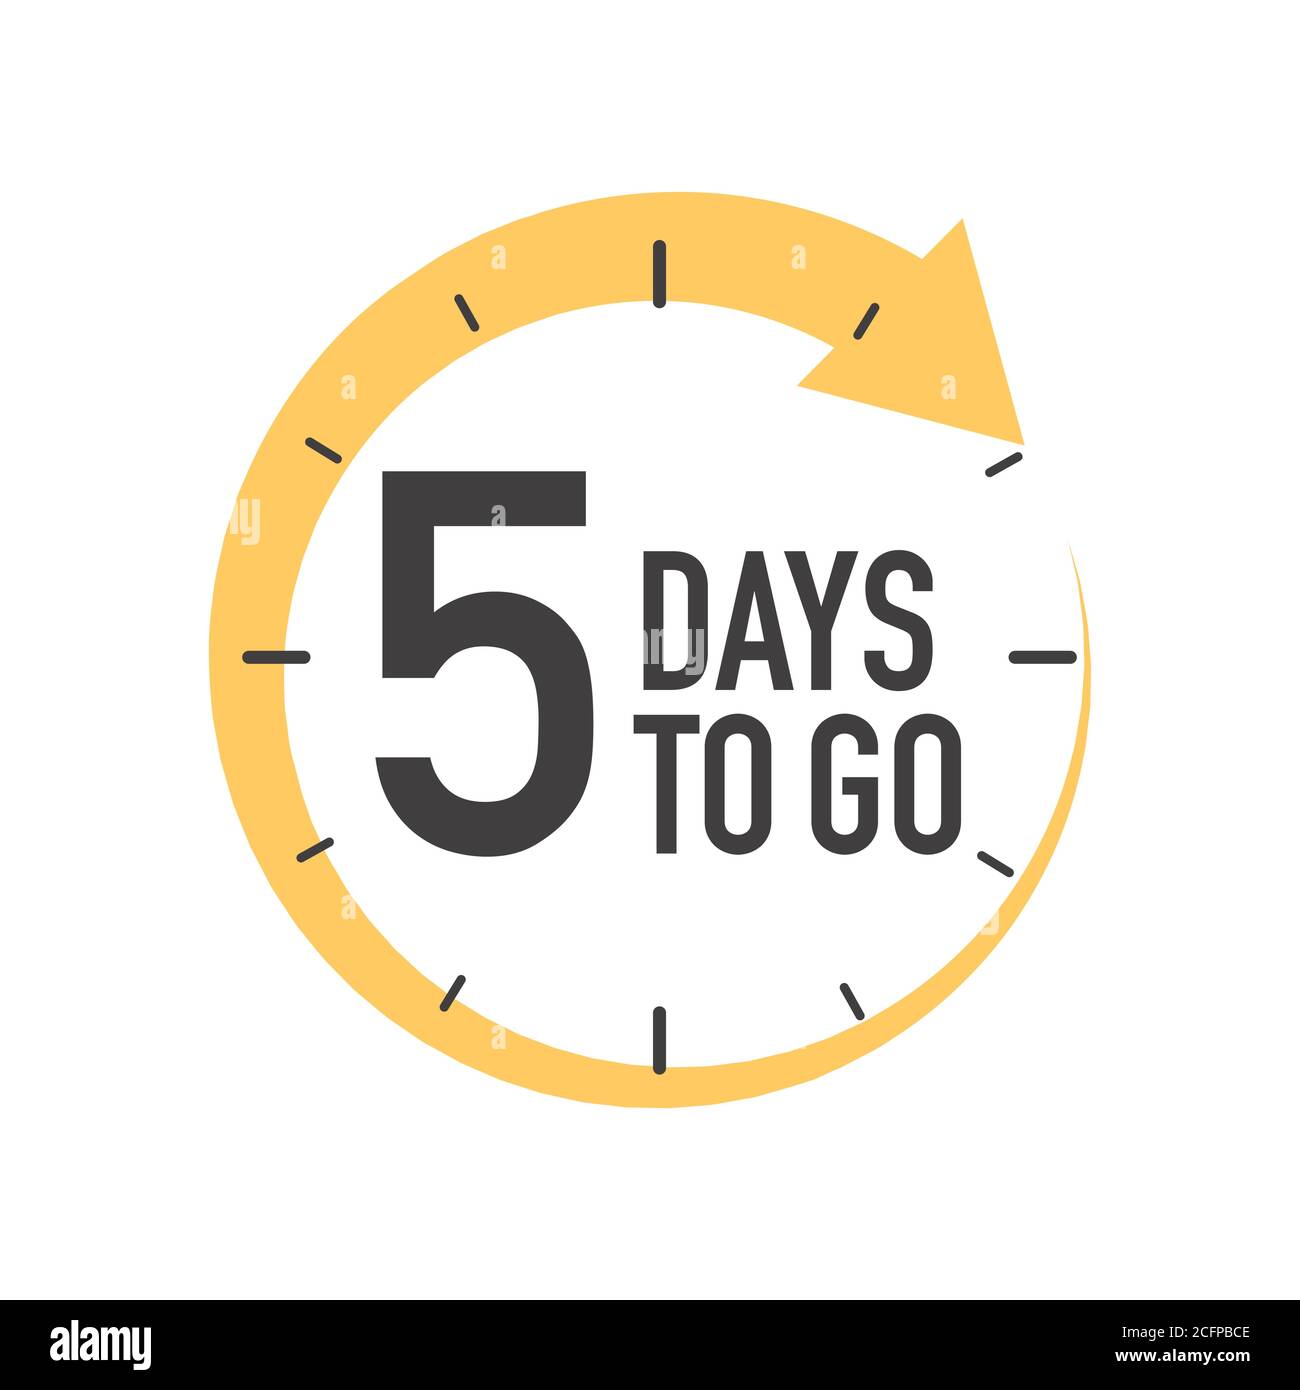 Five days to go icon. Round symbol with yellow arrow. Stock Vector